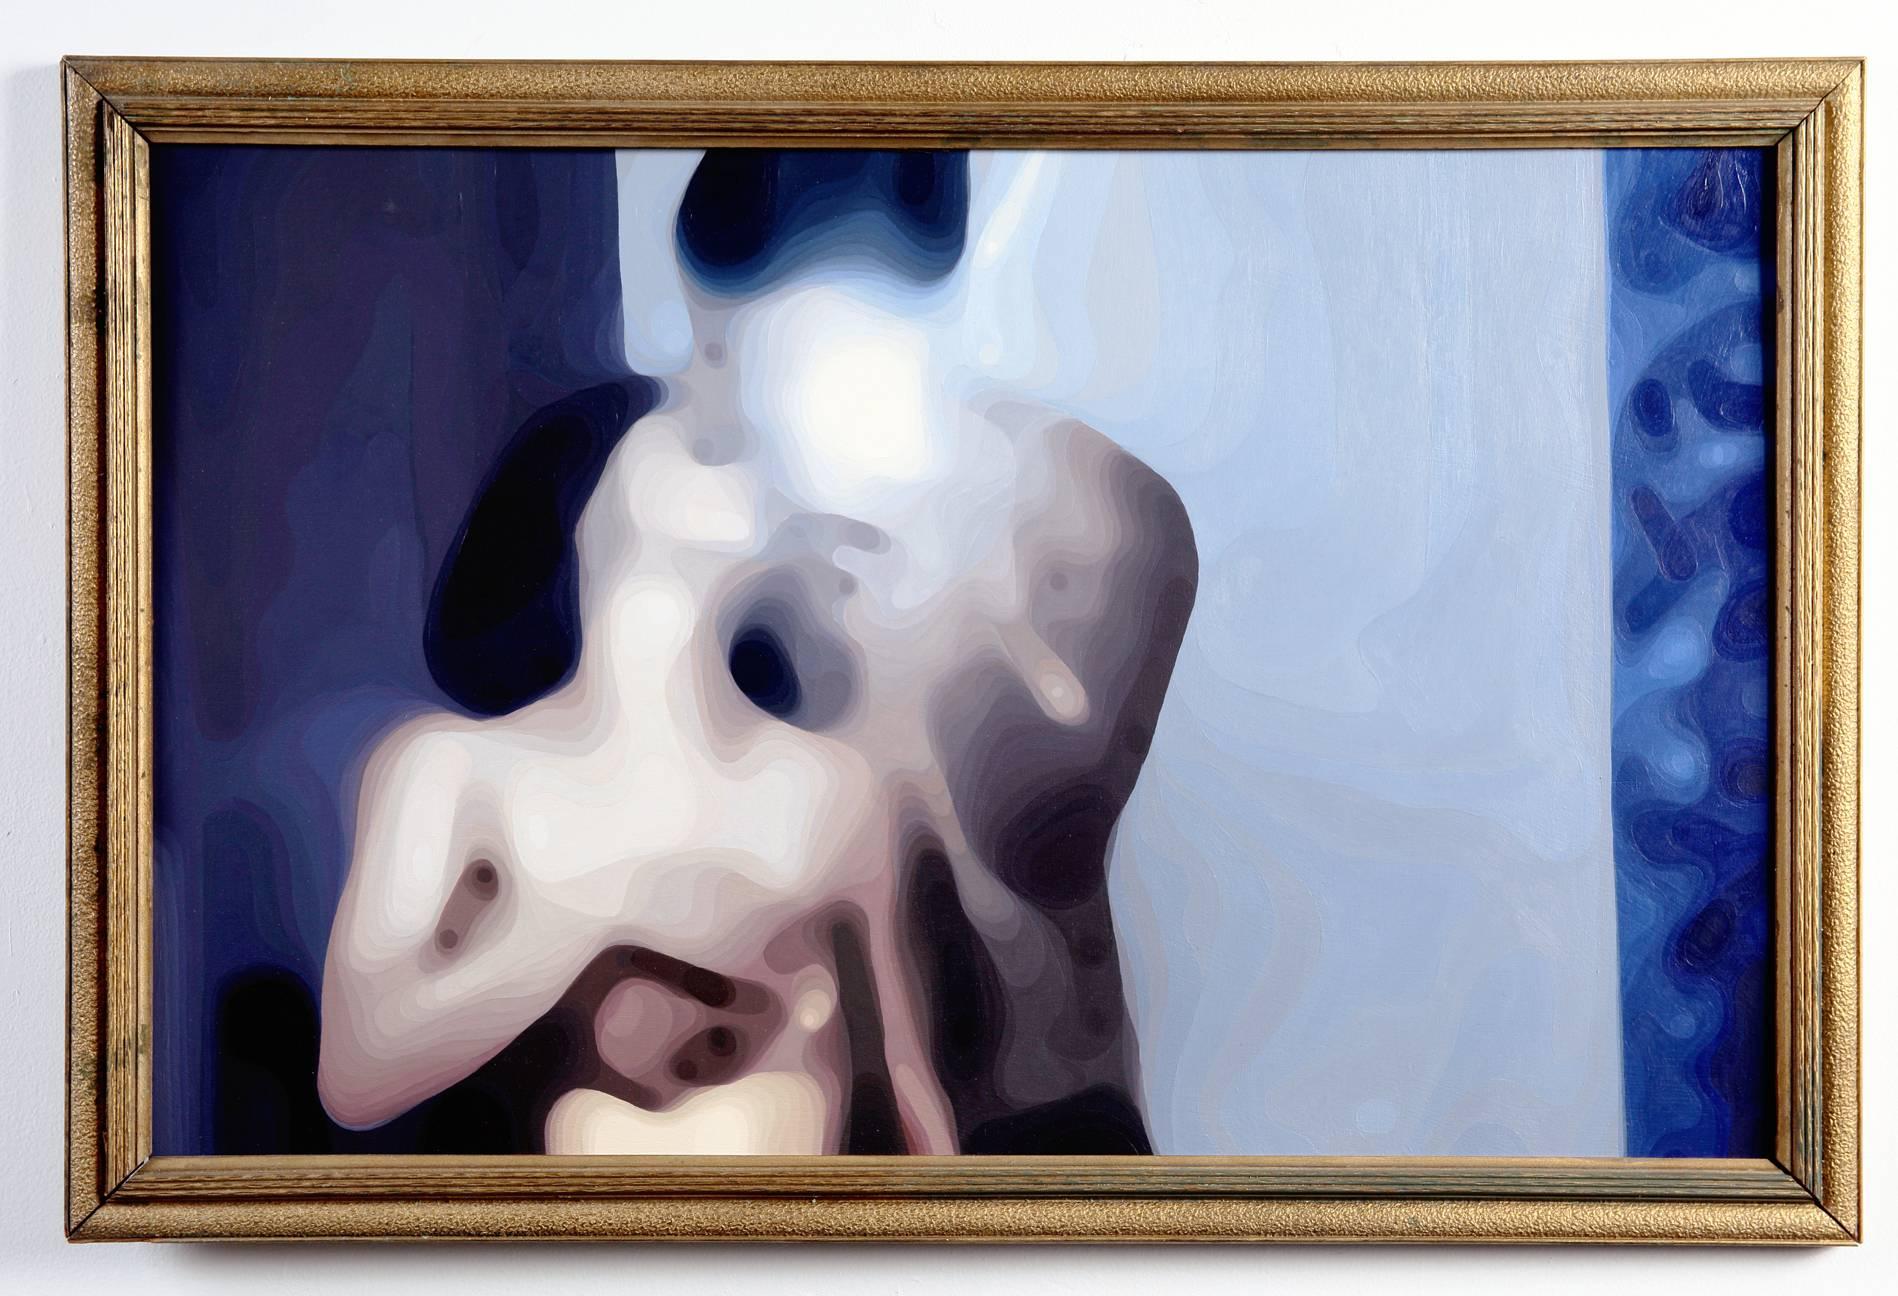 Carlton Scott Sturgill Nude Painting - hot couple looking for the same - mw4mw - 2430 (San Francisco)